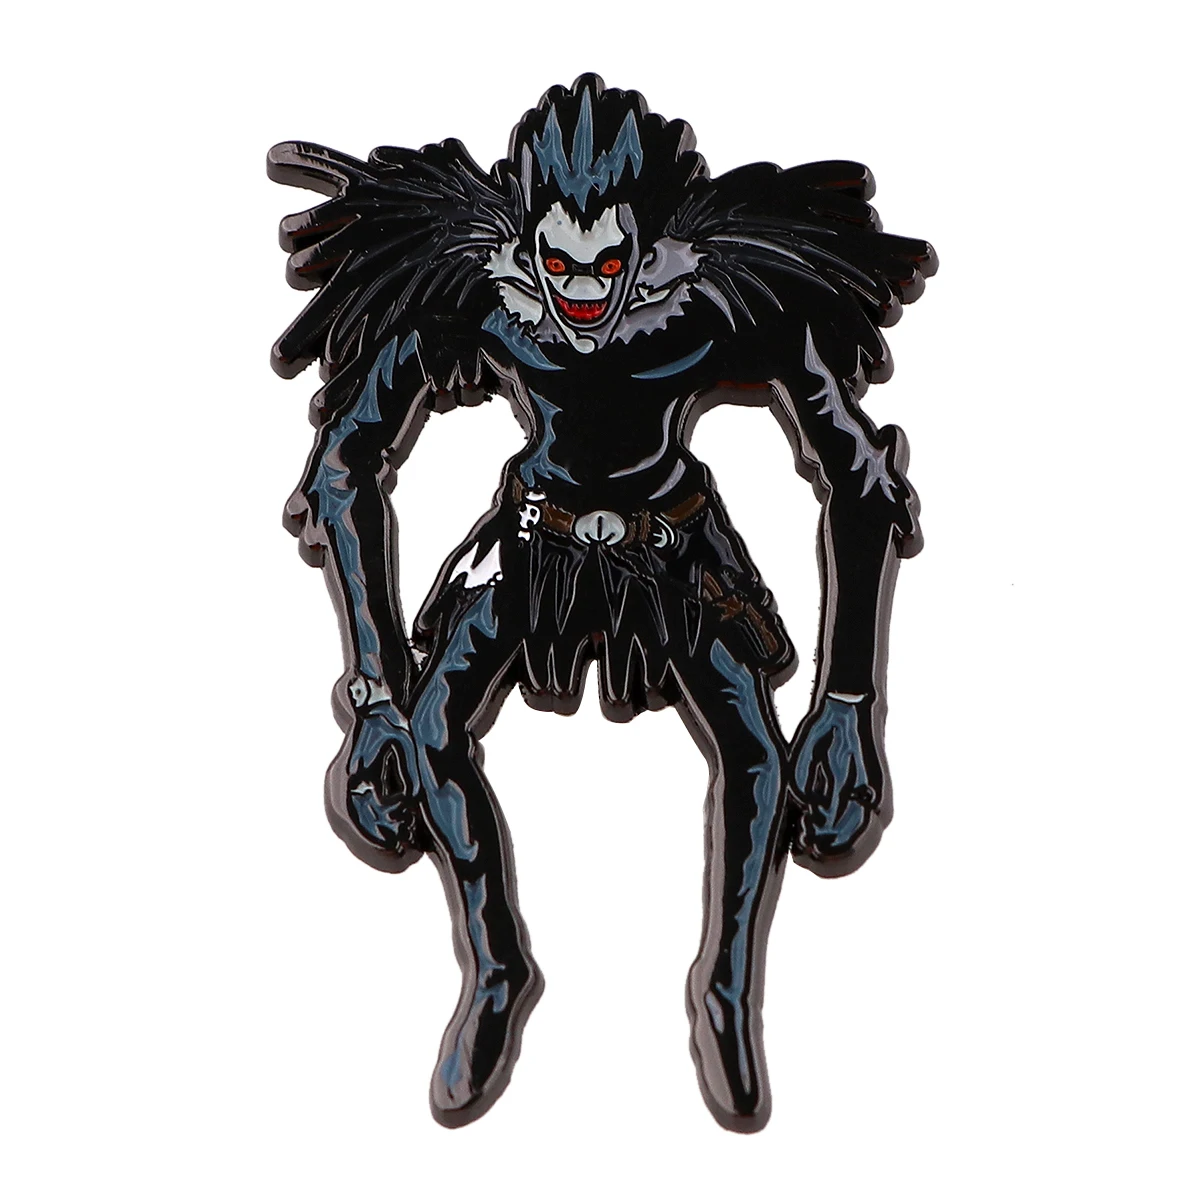 DEATH NOTE Ryuk Anime Brooches for Clothing Enamel Pins Briefcase Badges Lapel Pins for Backpack Fashion Jewelry Accessories